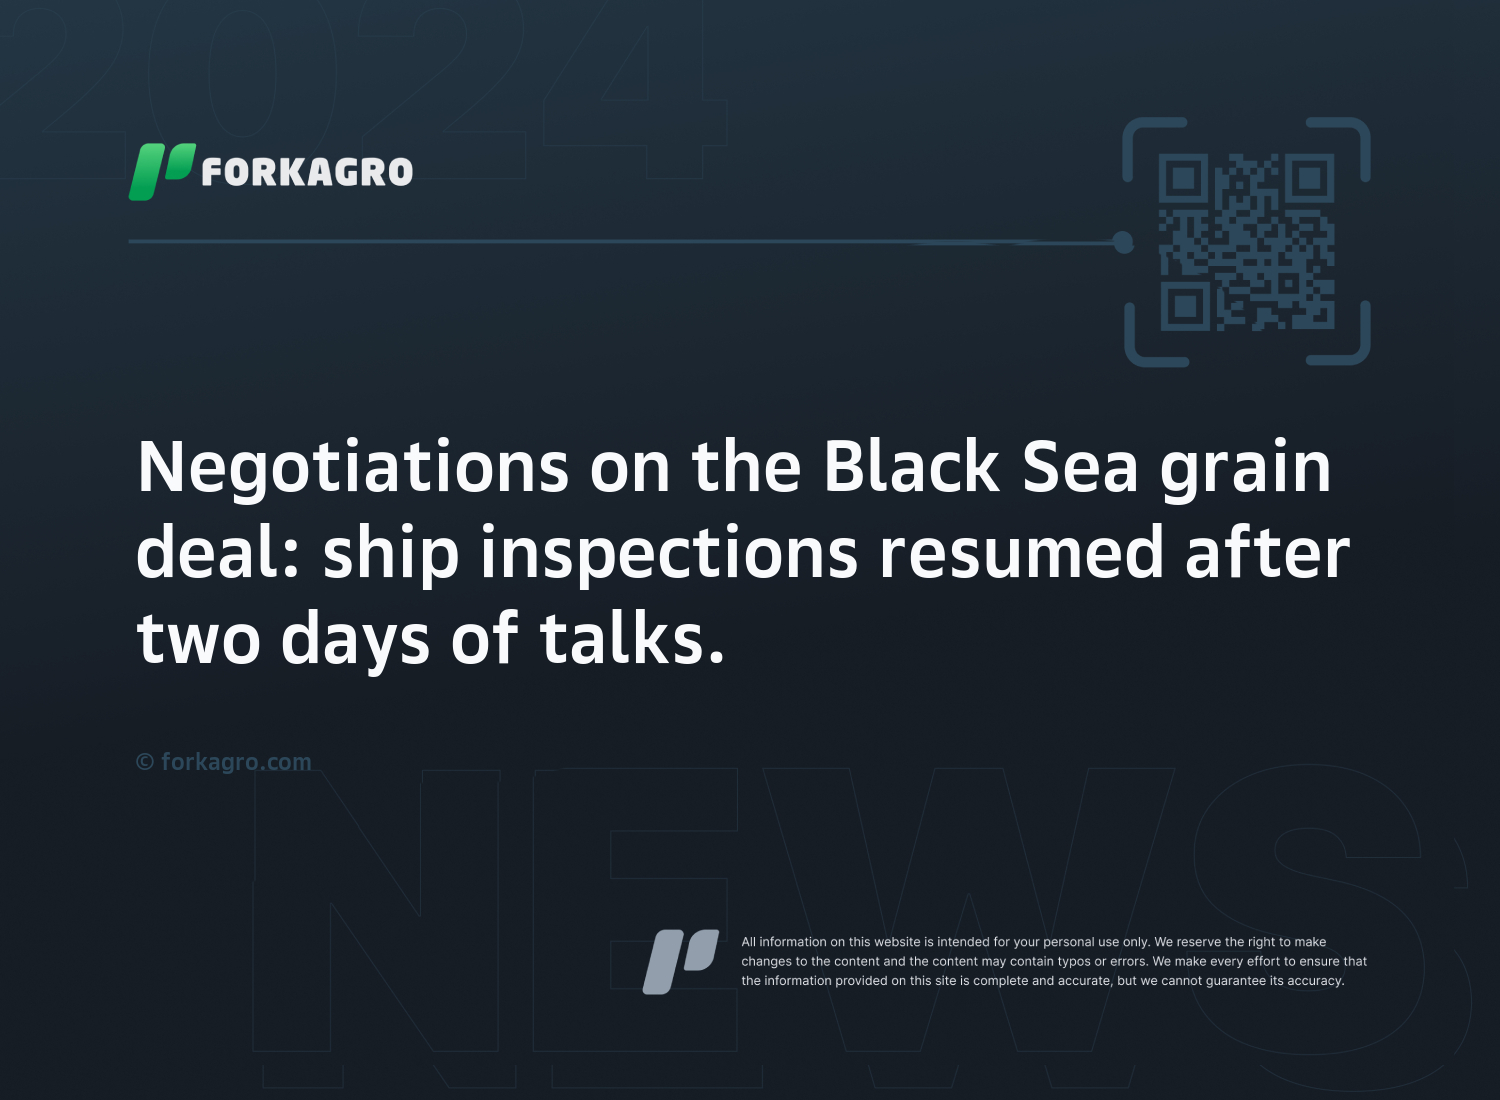 Negotiations on the Black Sea grain deal: ship inspections resumed after two days of talks.